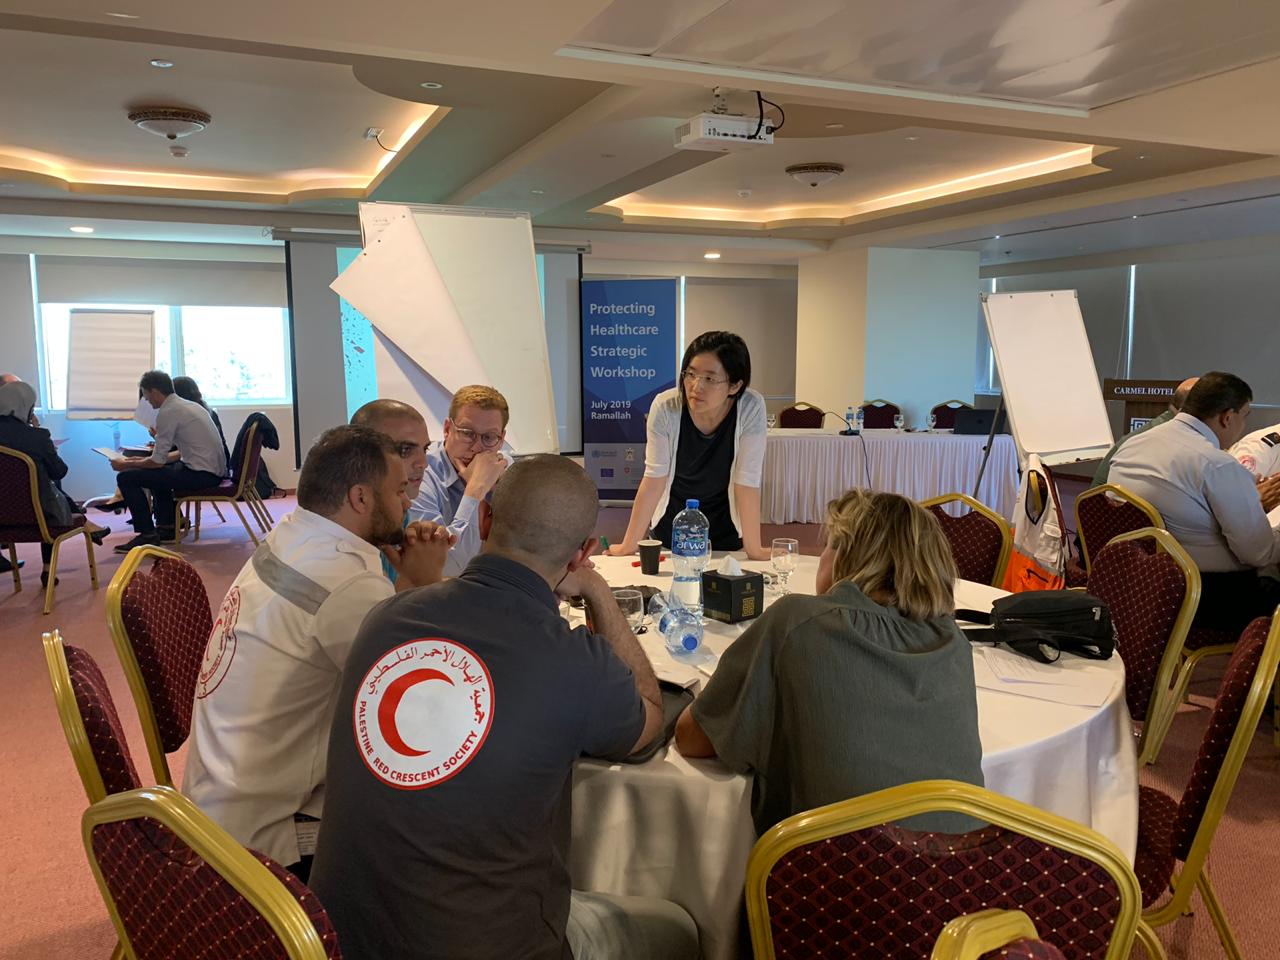 Group discussion during the workshop in Ramallah. Photo credit: WHO